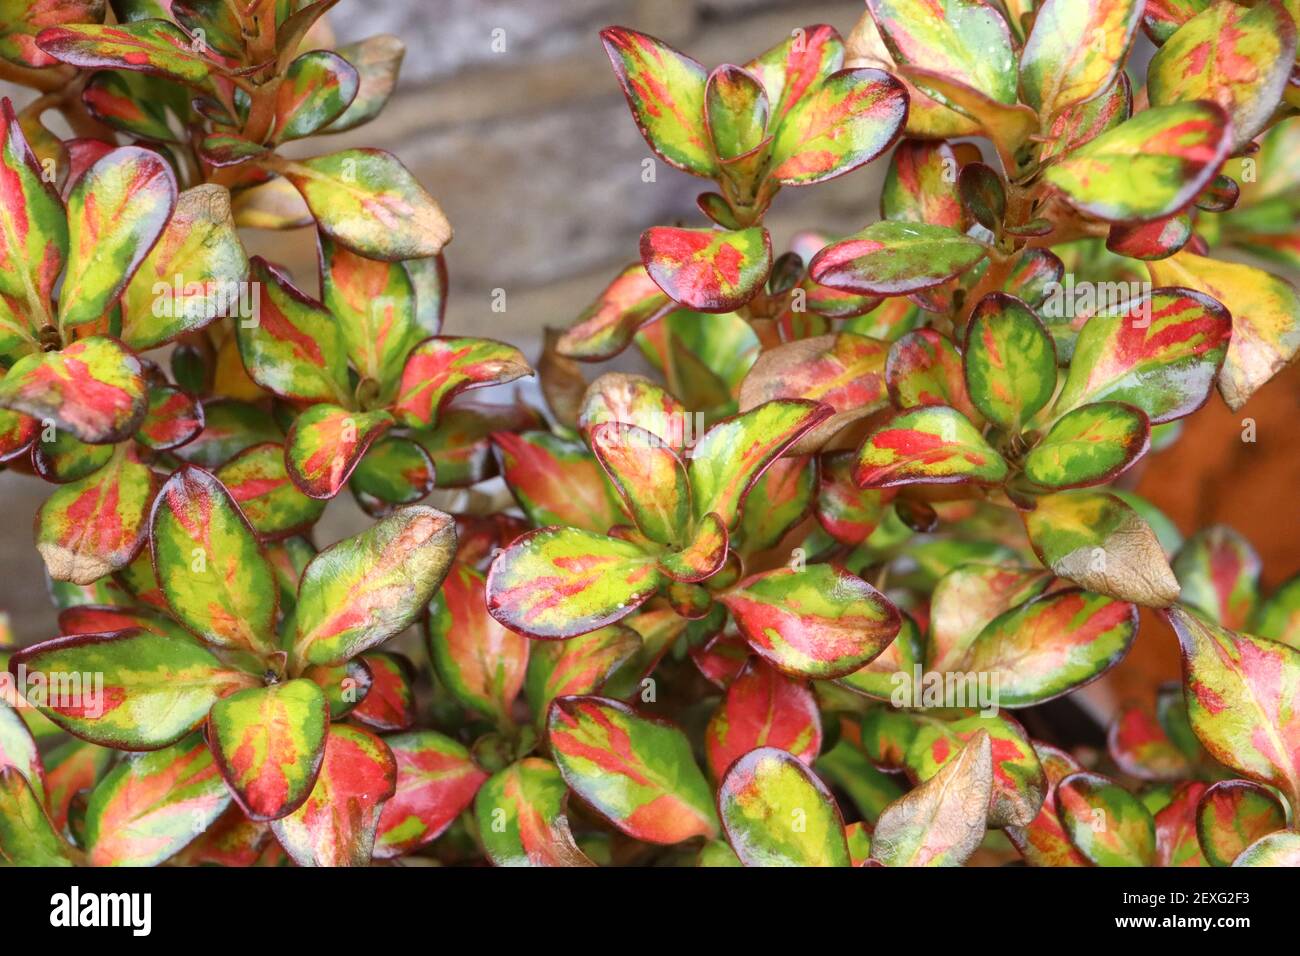 Coprosma repens ‘Lemon and Lime’ looking-glass plant Lemon and Lime – multi-colored small shiny ovate leaves, March, England, UK Stockfoto